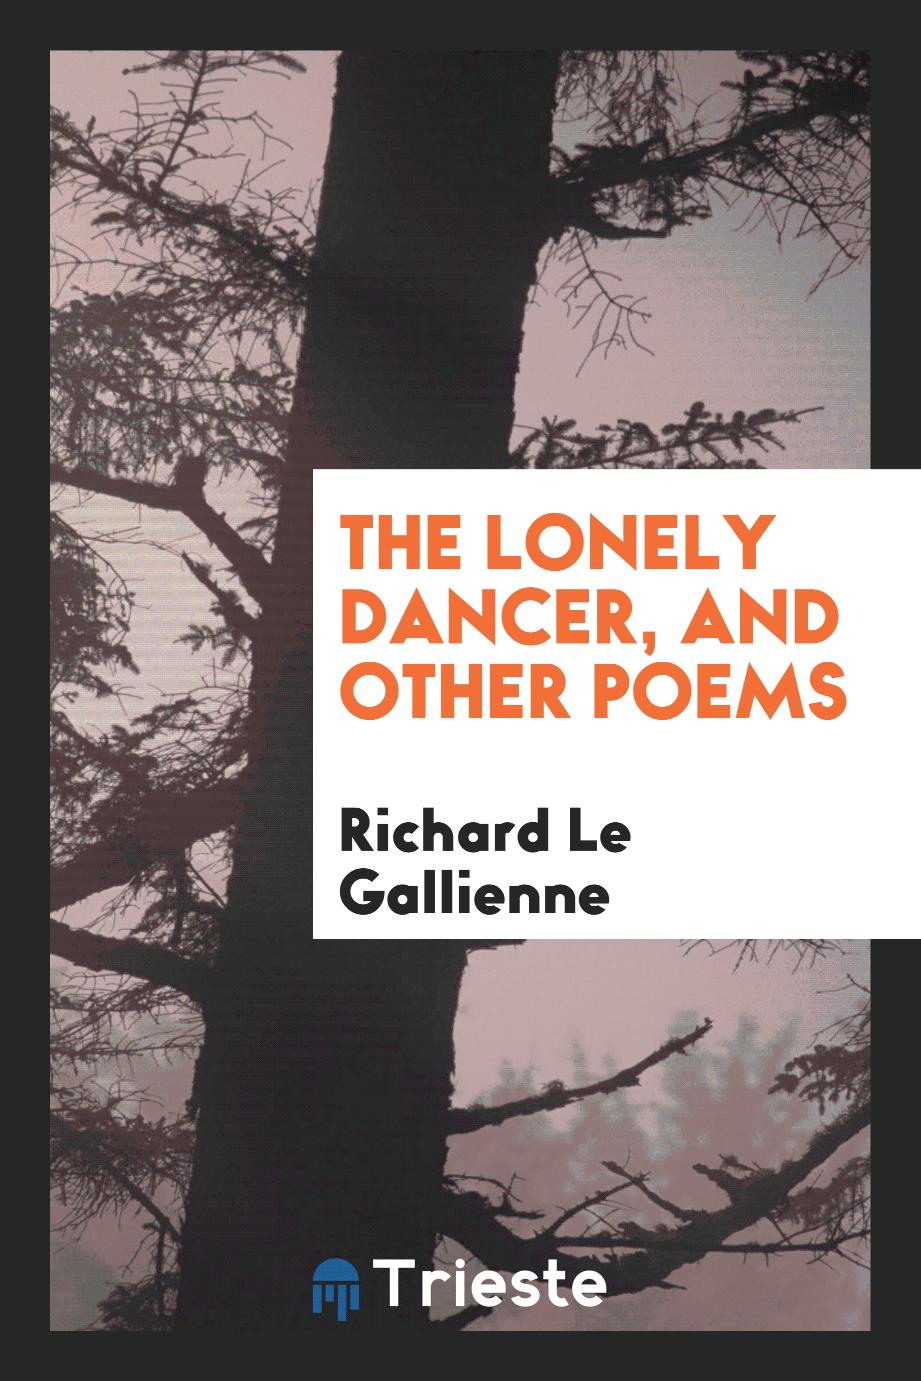 The lonely dancer, and other poems